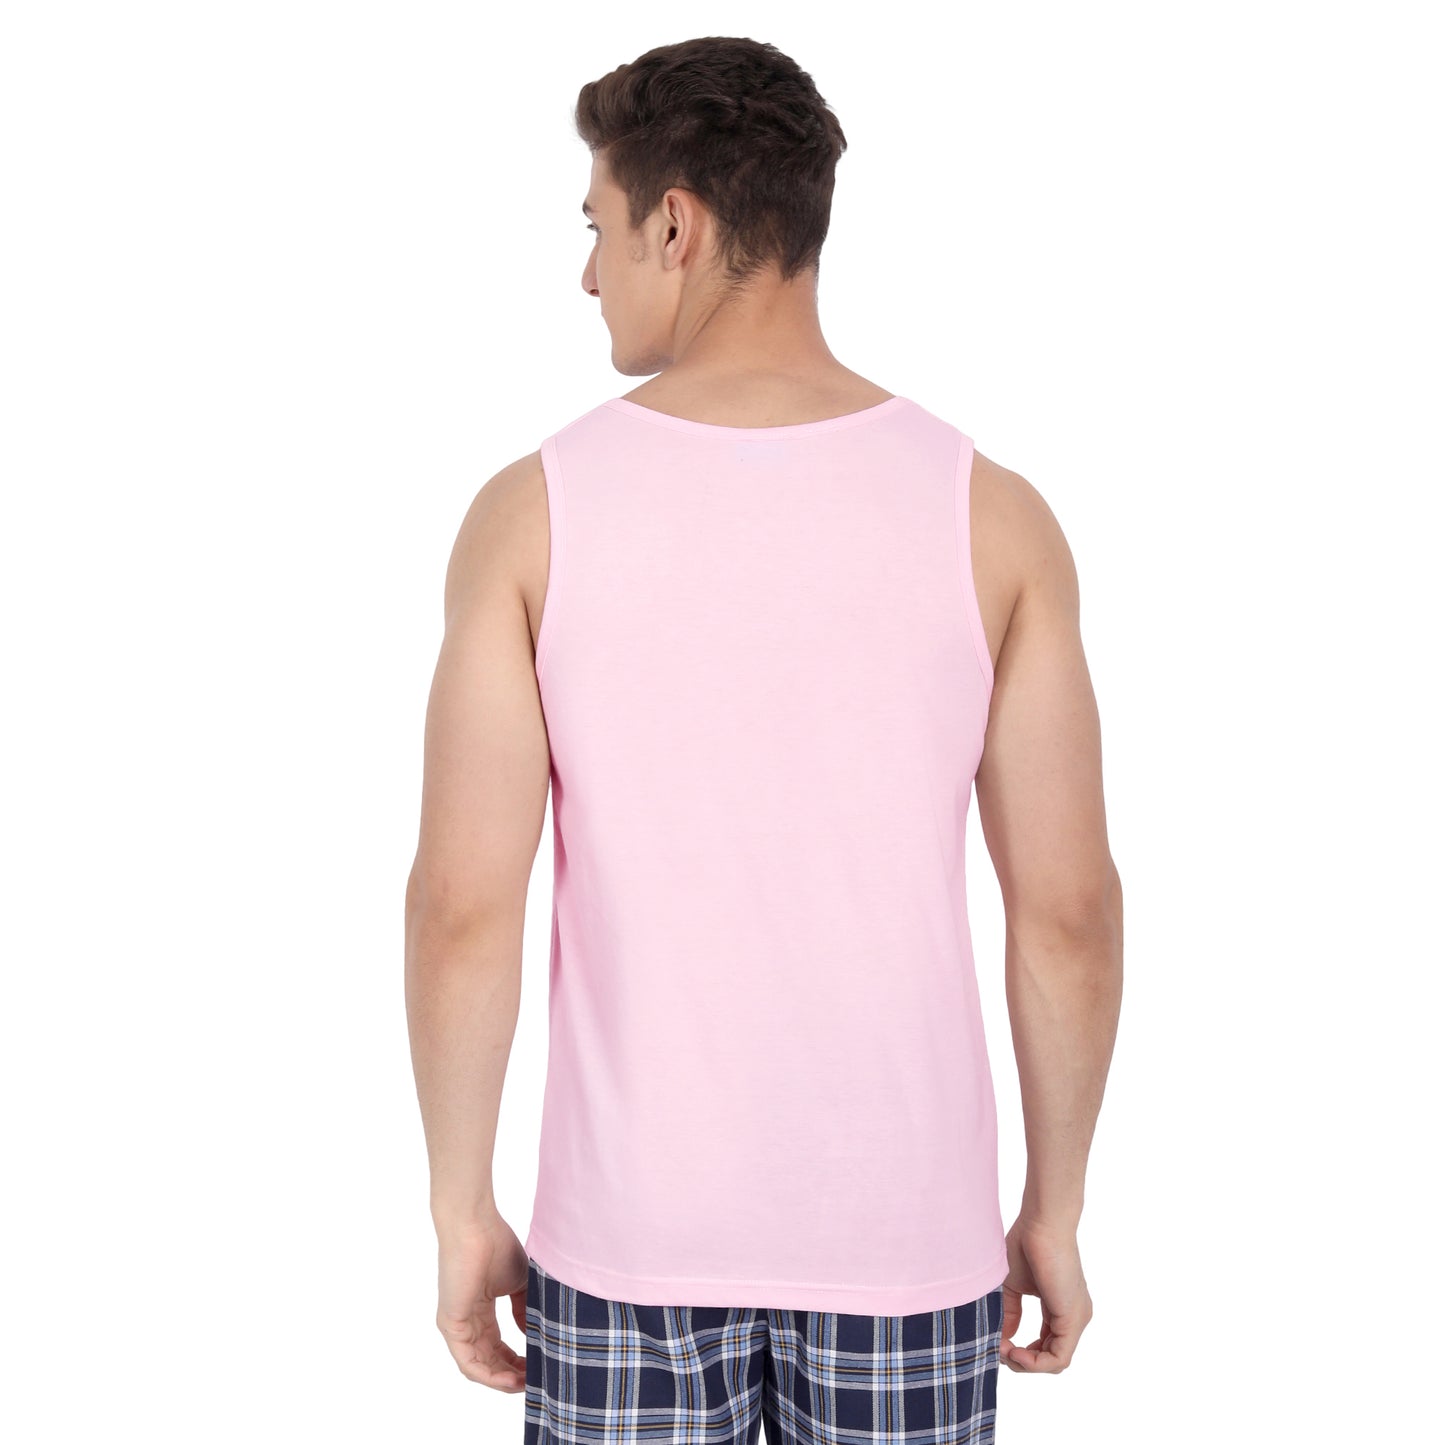 Cotton Candy - True Essential Tank Top